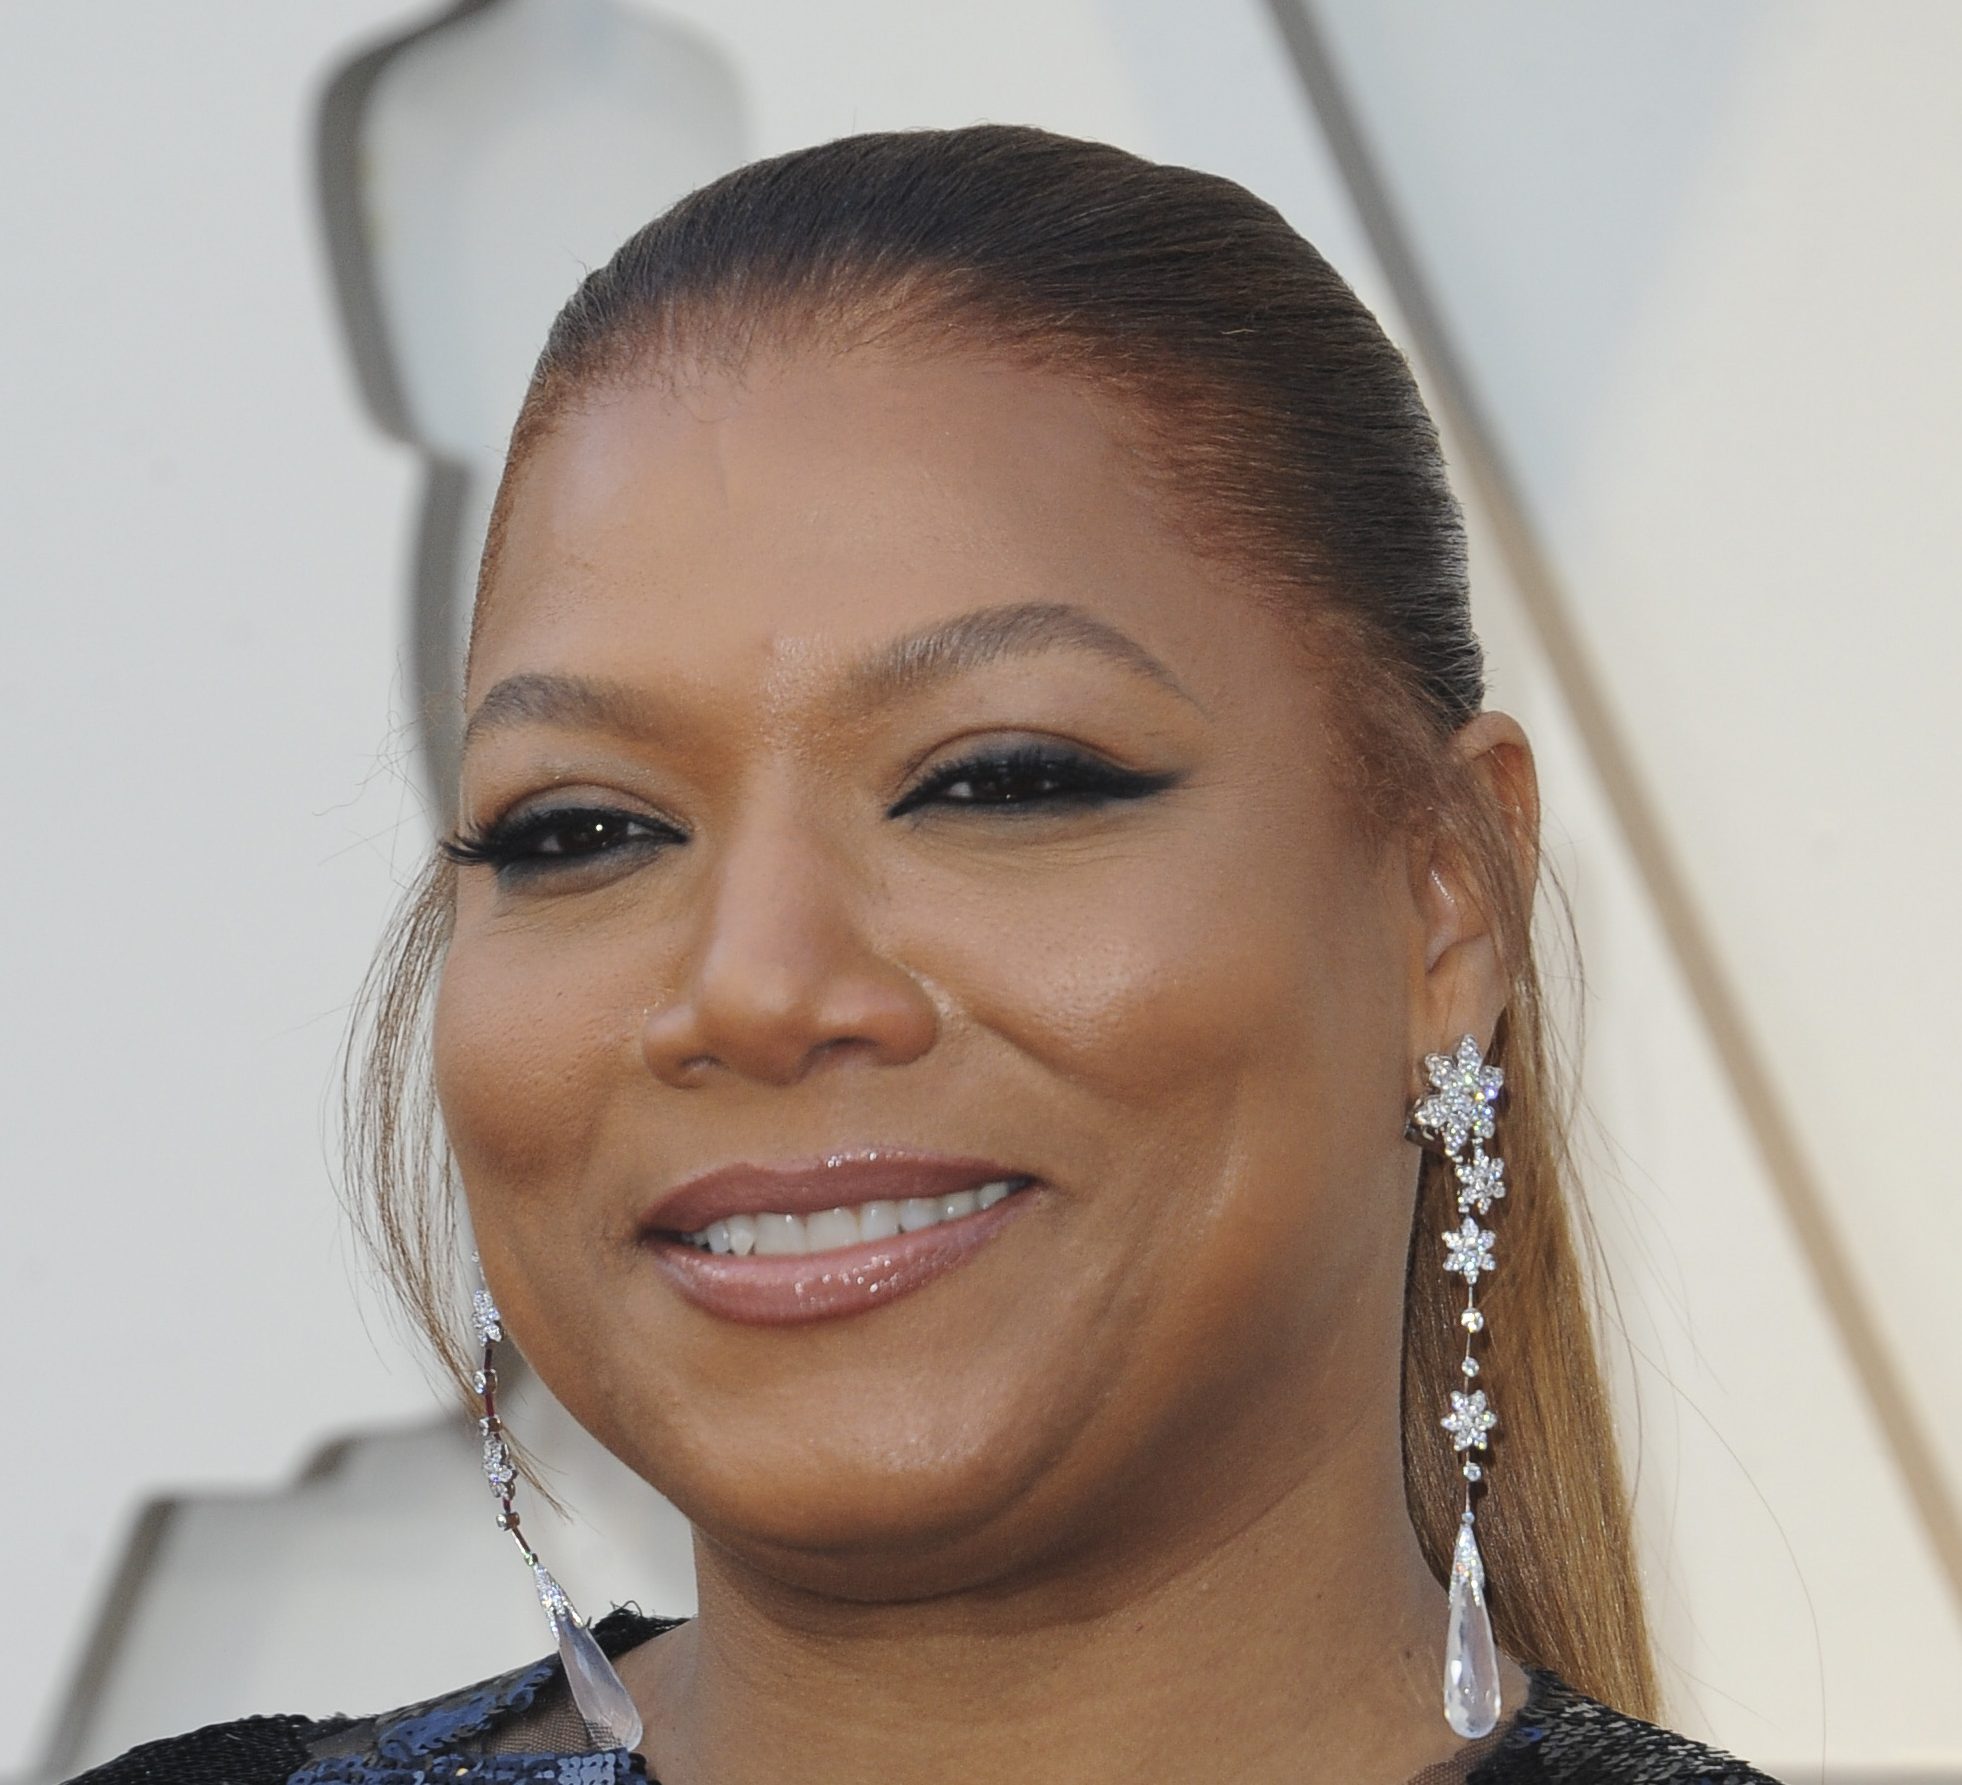 QUEEN LATIFA TATTOOS PICTURES PHOTOS IMAGES PICS OF HER TATTOOS